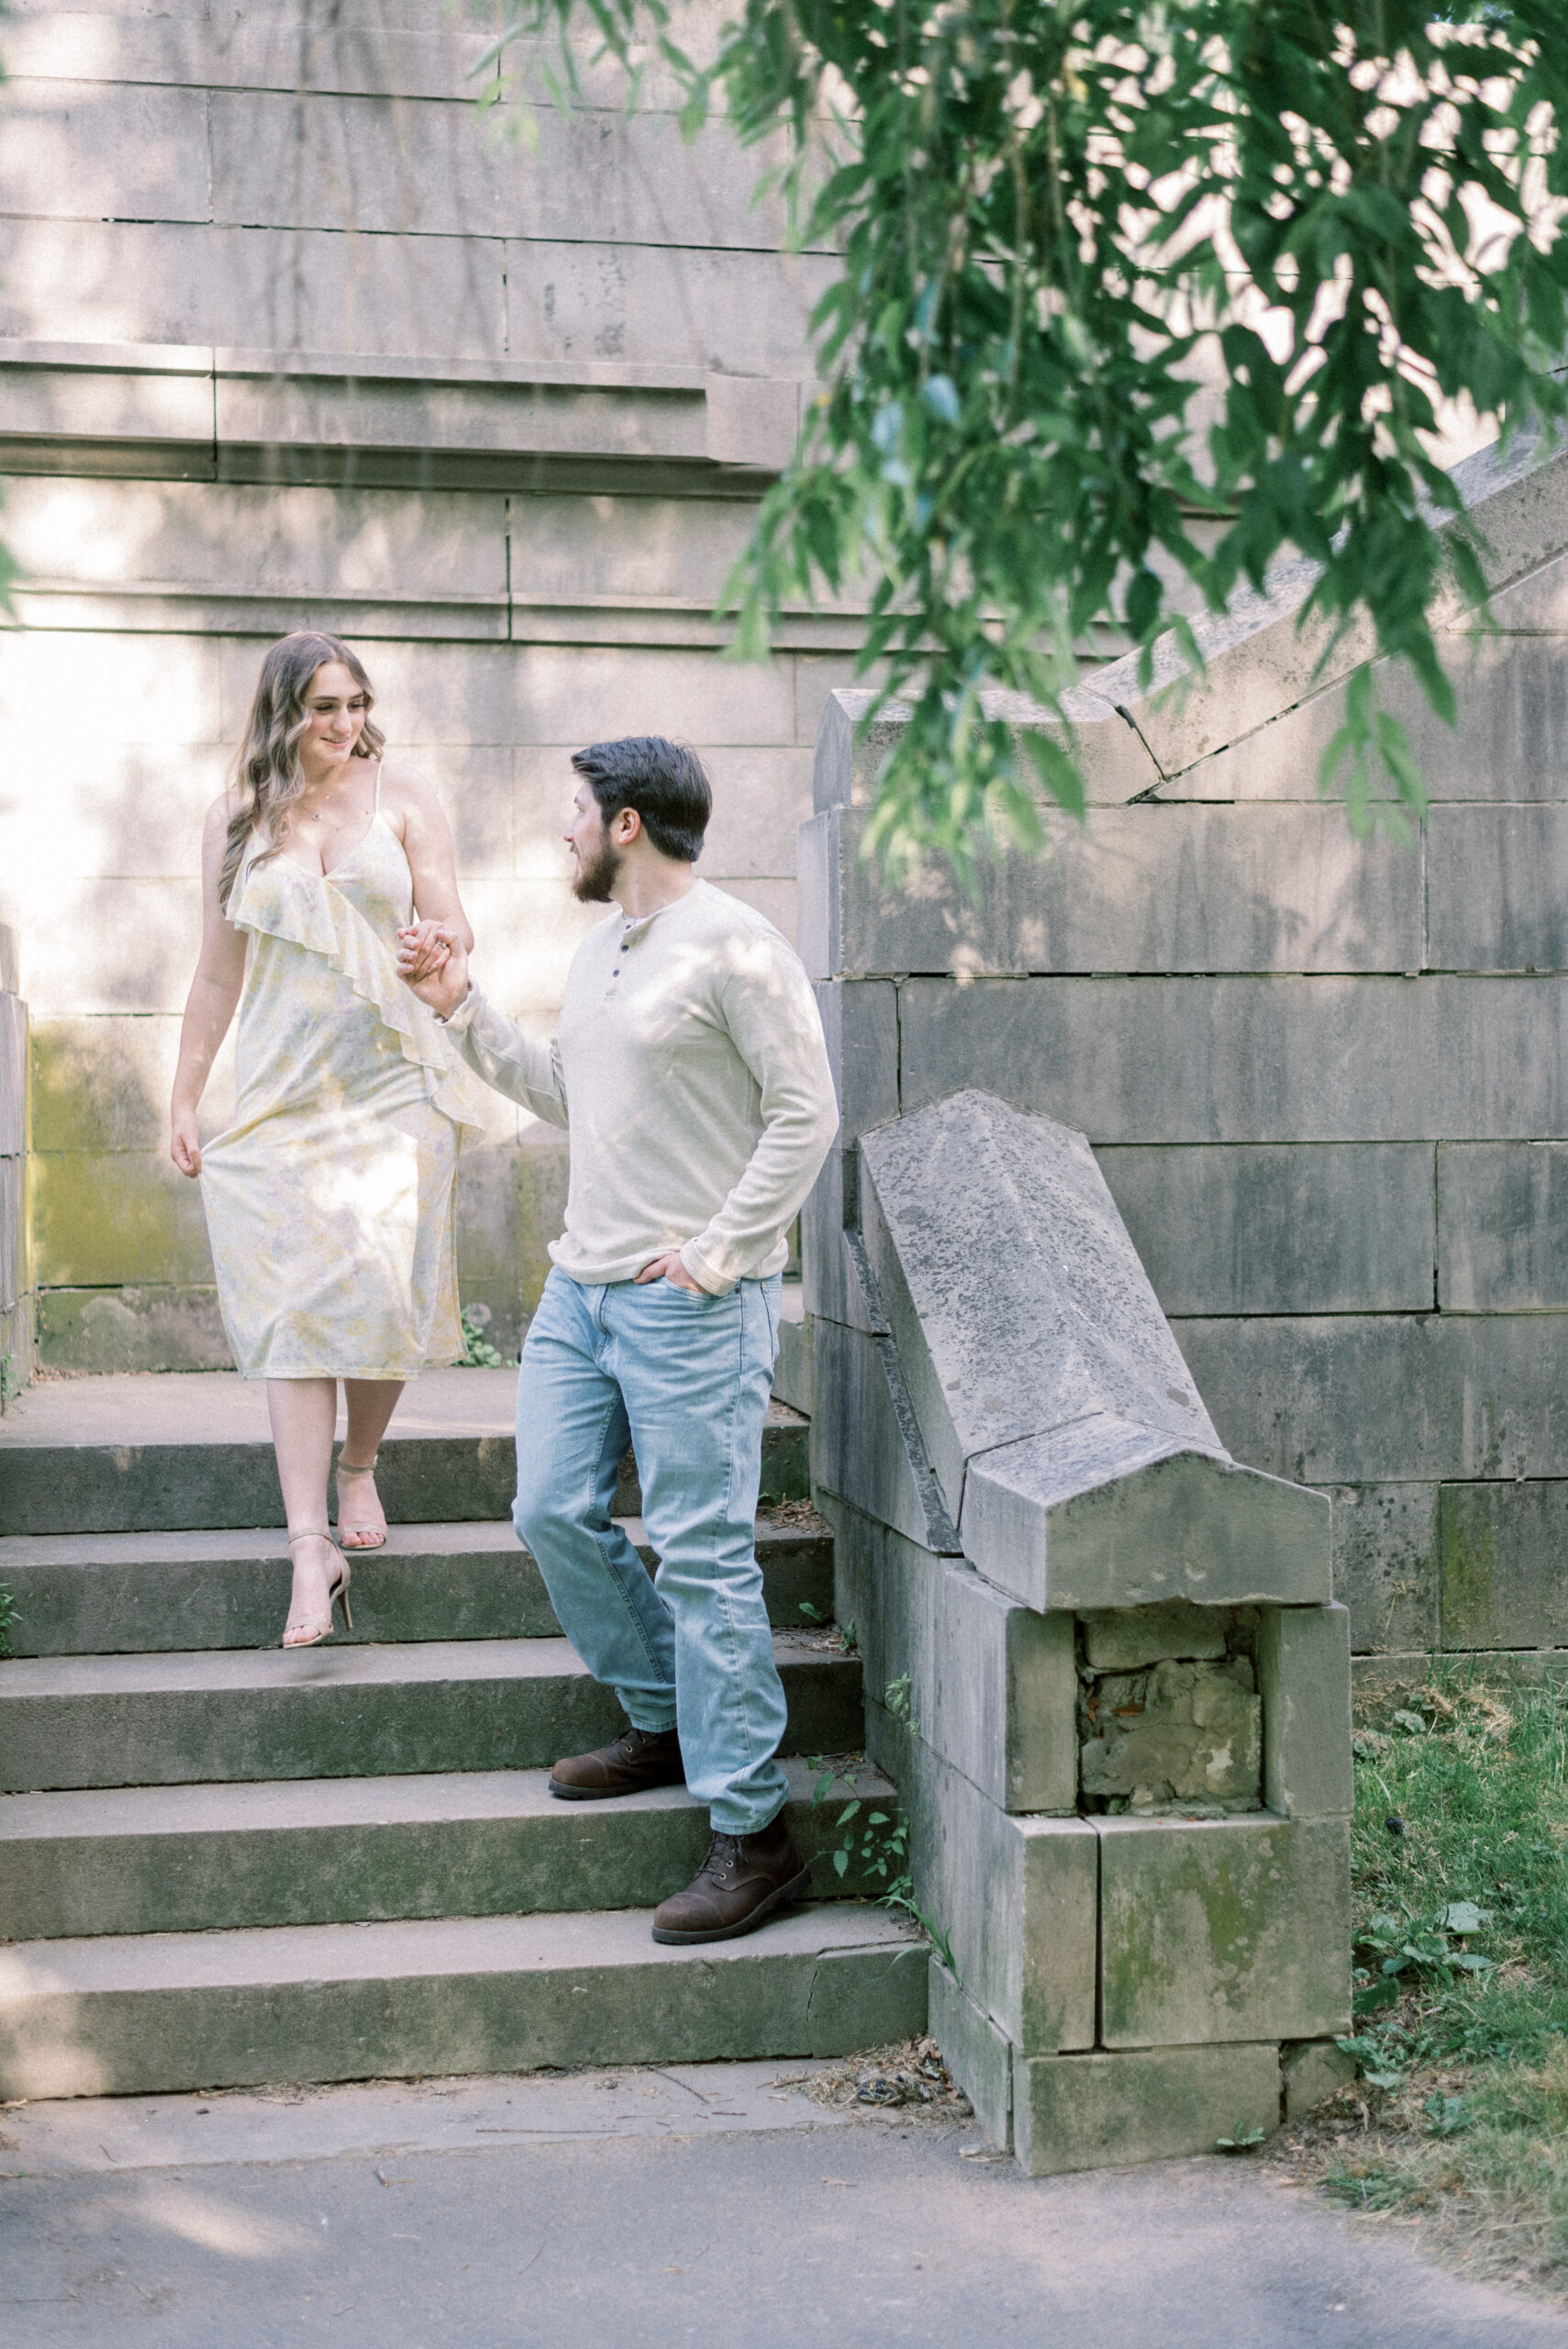 Maryland wedding photographer captures man leading woman downstairs